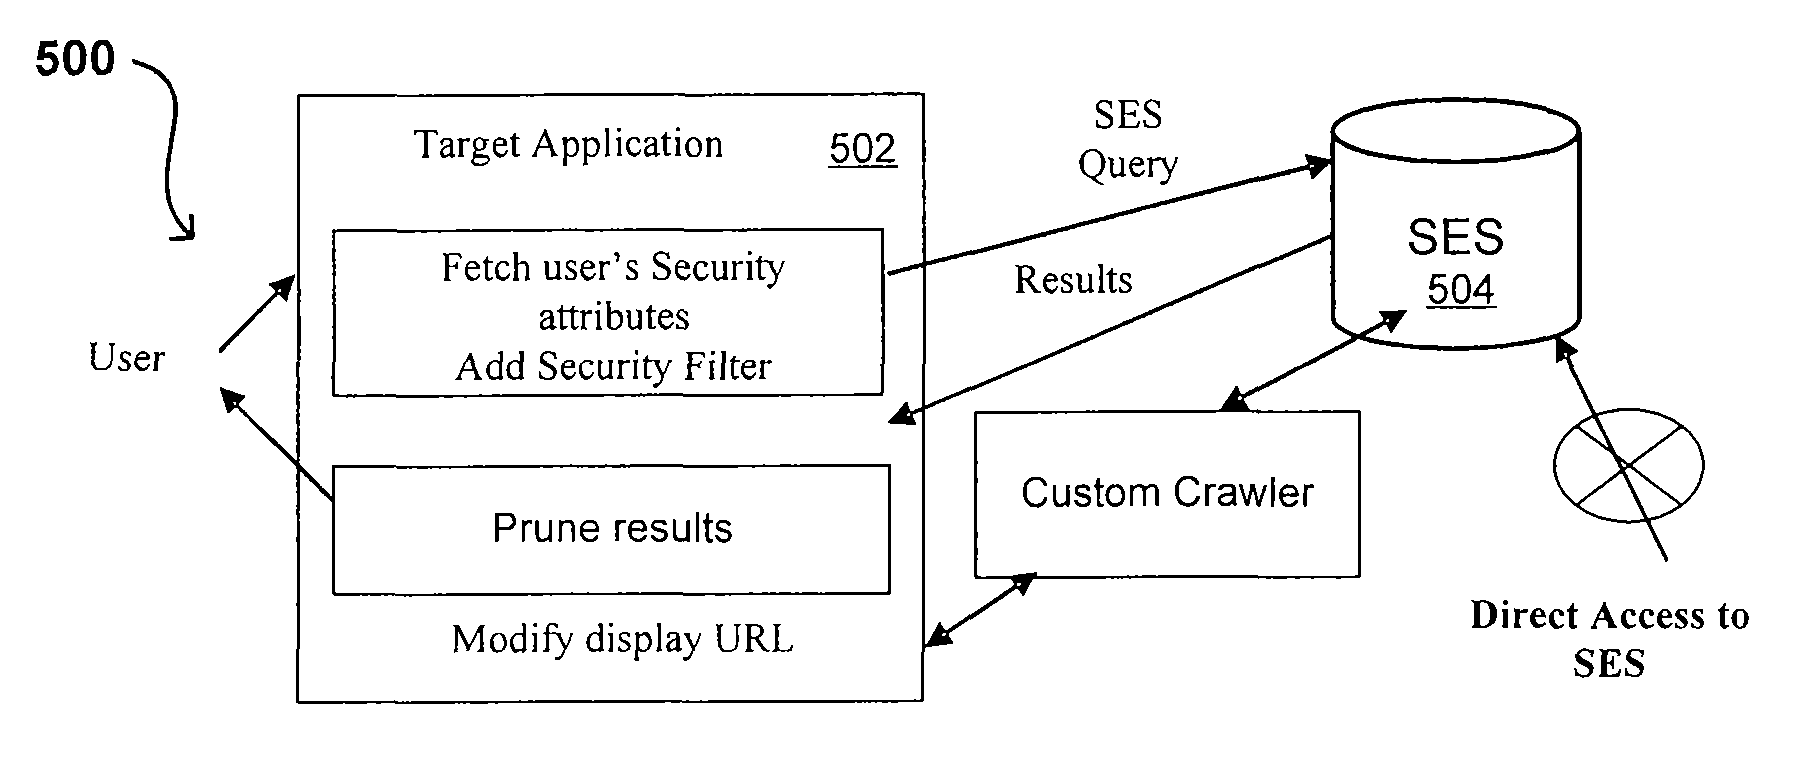 Self-service sources for secure search